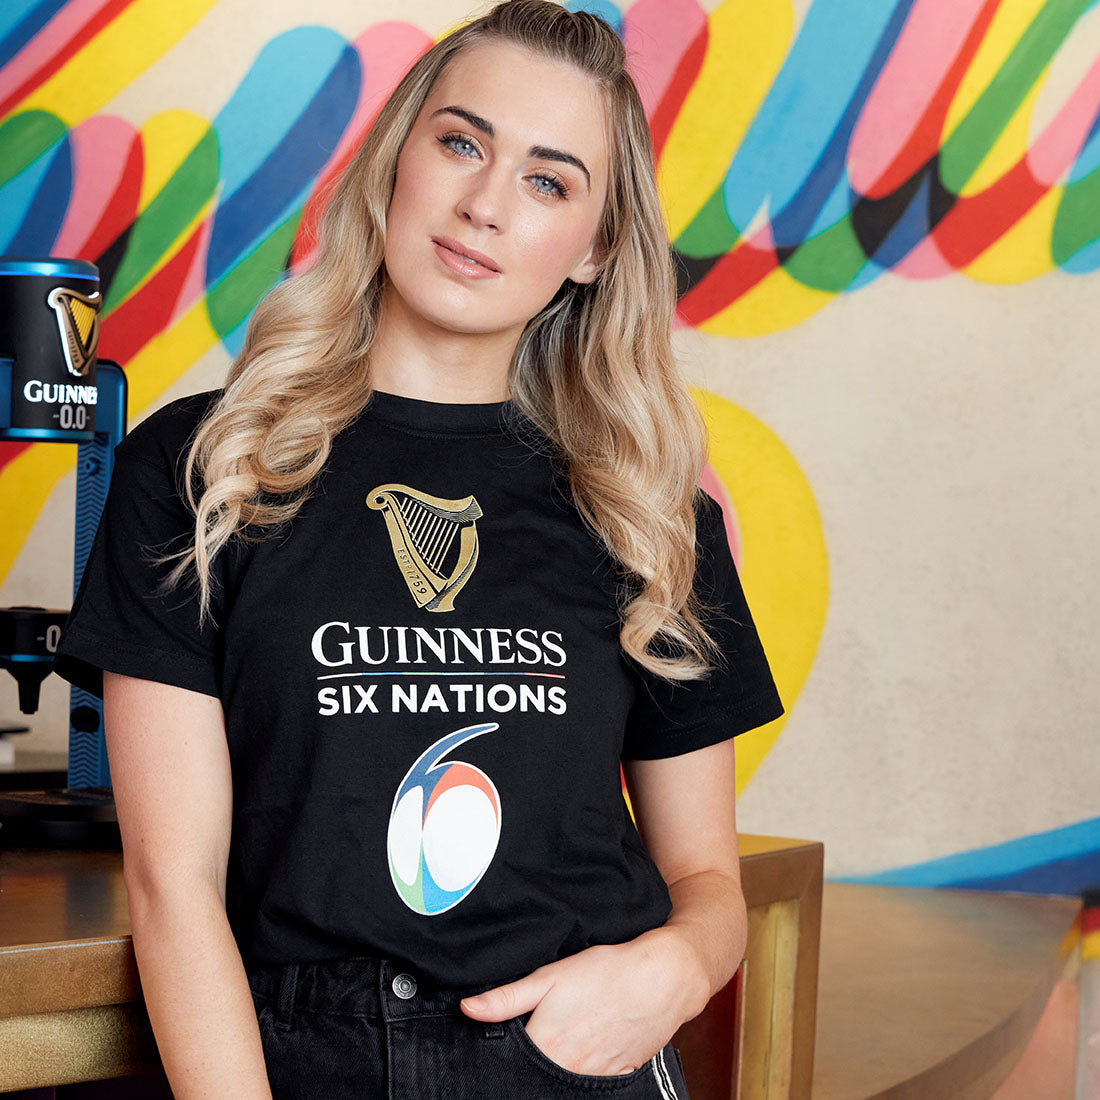 Woman in an official Guinness Six Nations Black Tee t-shirt standing in front of a colorful striped background.